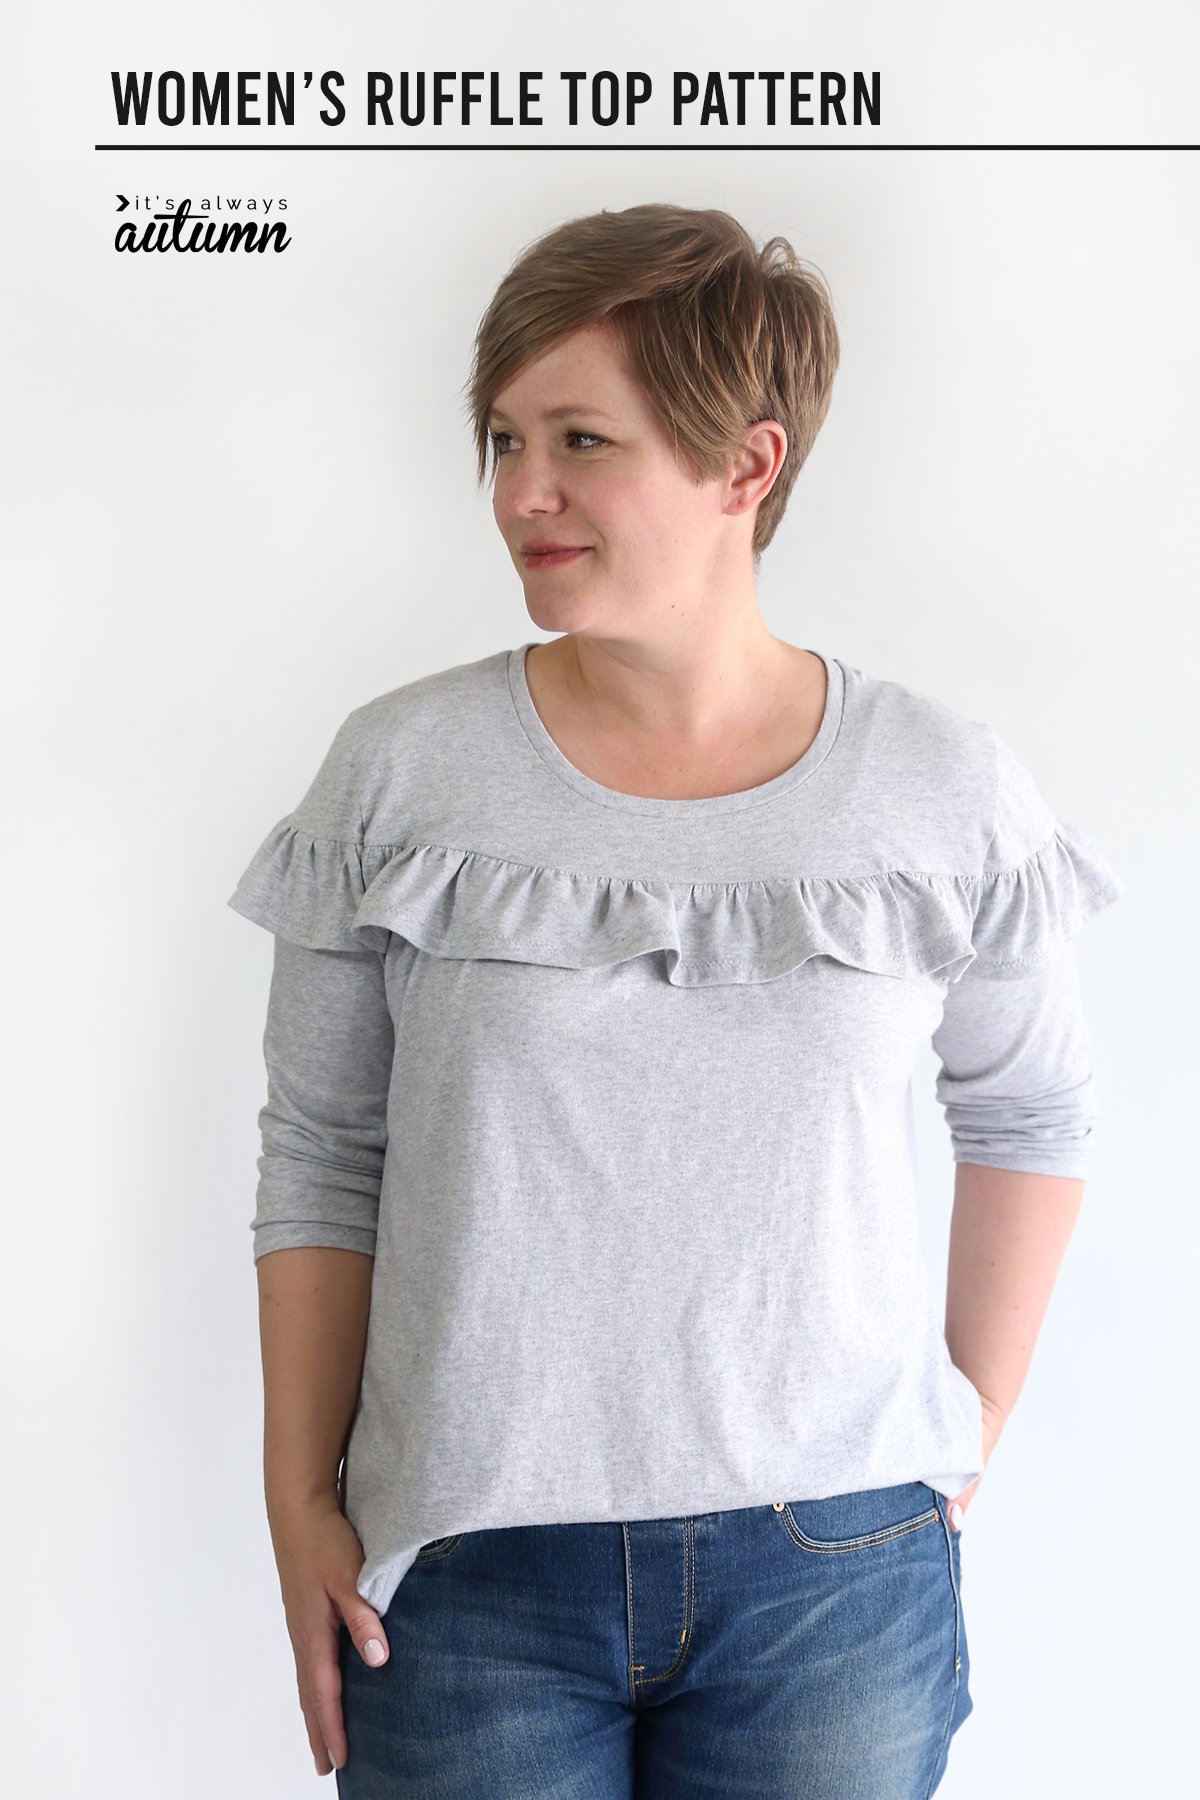 A woman wearing a t-shirt with a ruffle across the front